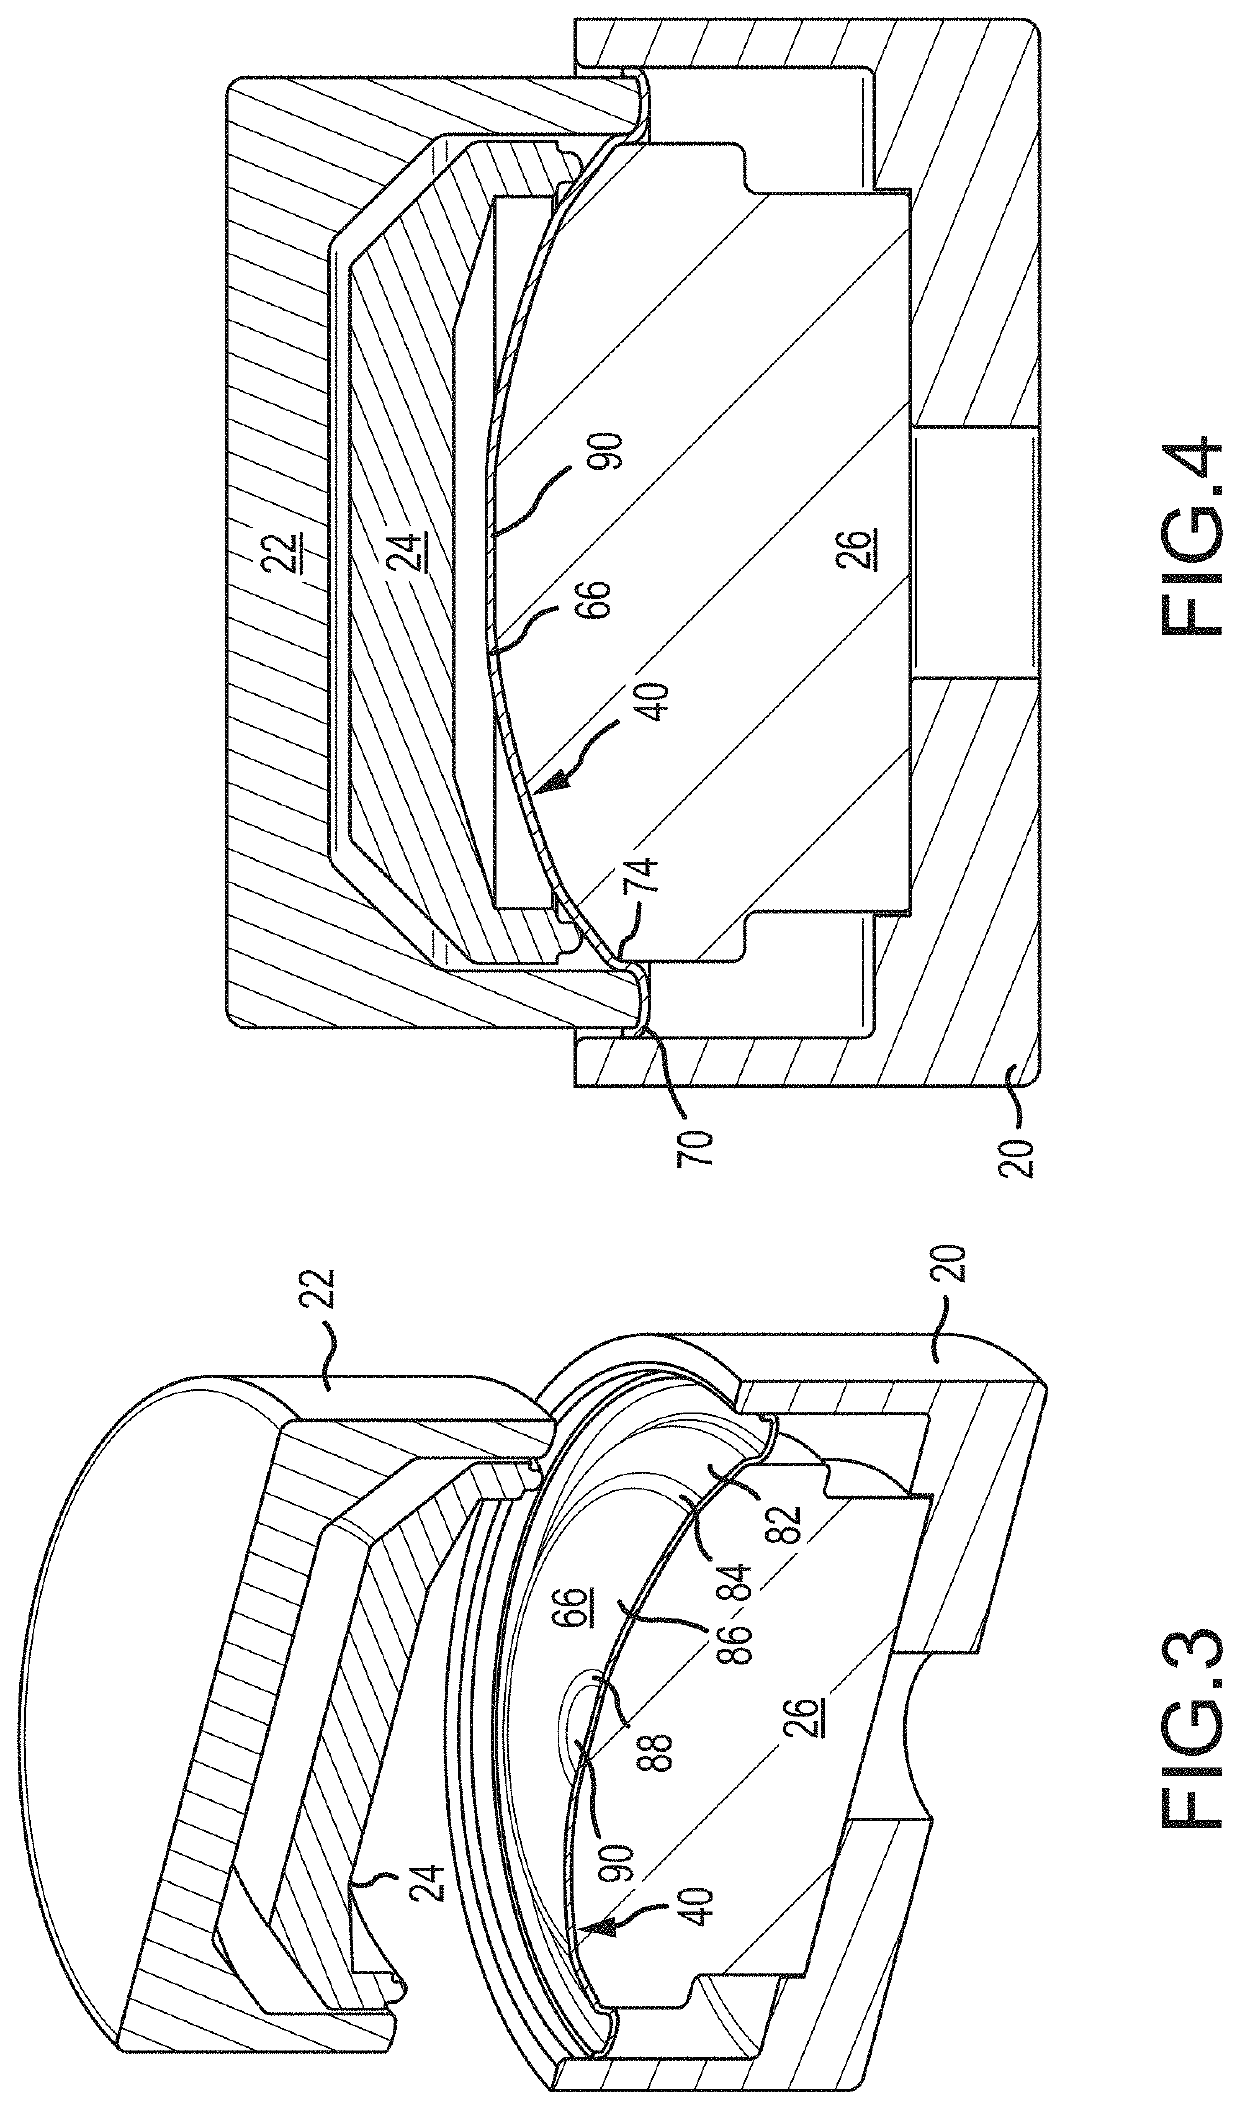 Metallic container dome configured to deform at a predetermined pressure